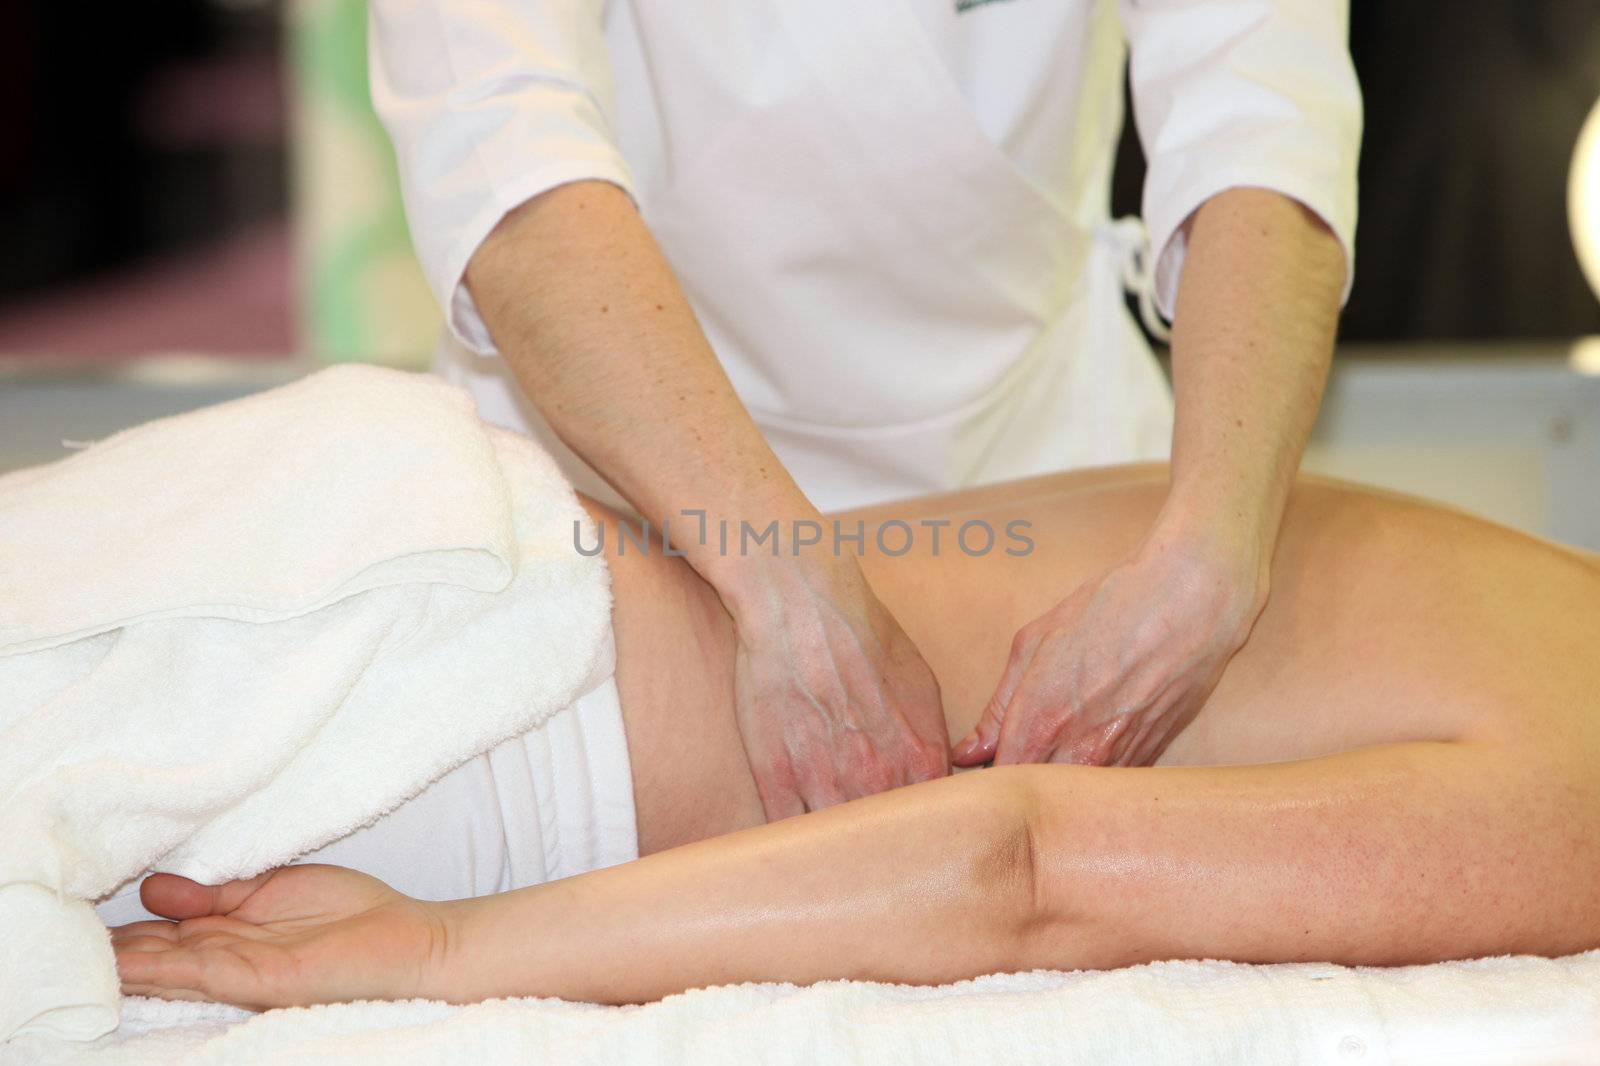 A woman receives a massage  by Farina6000